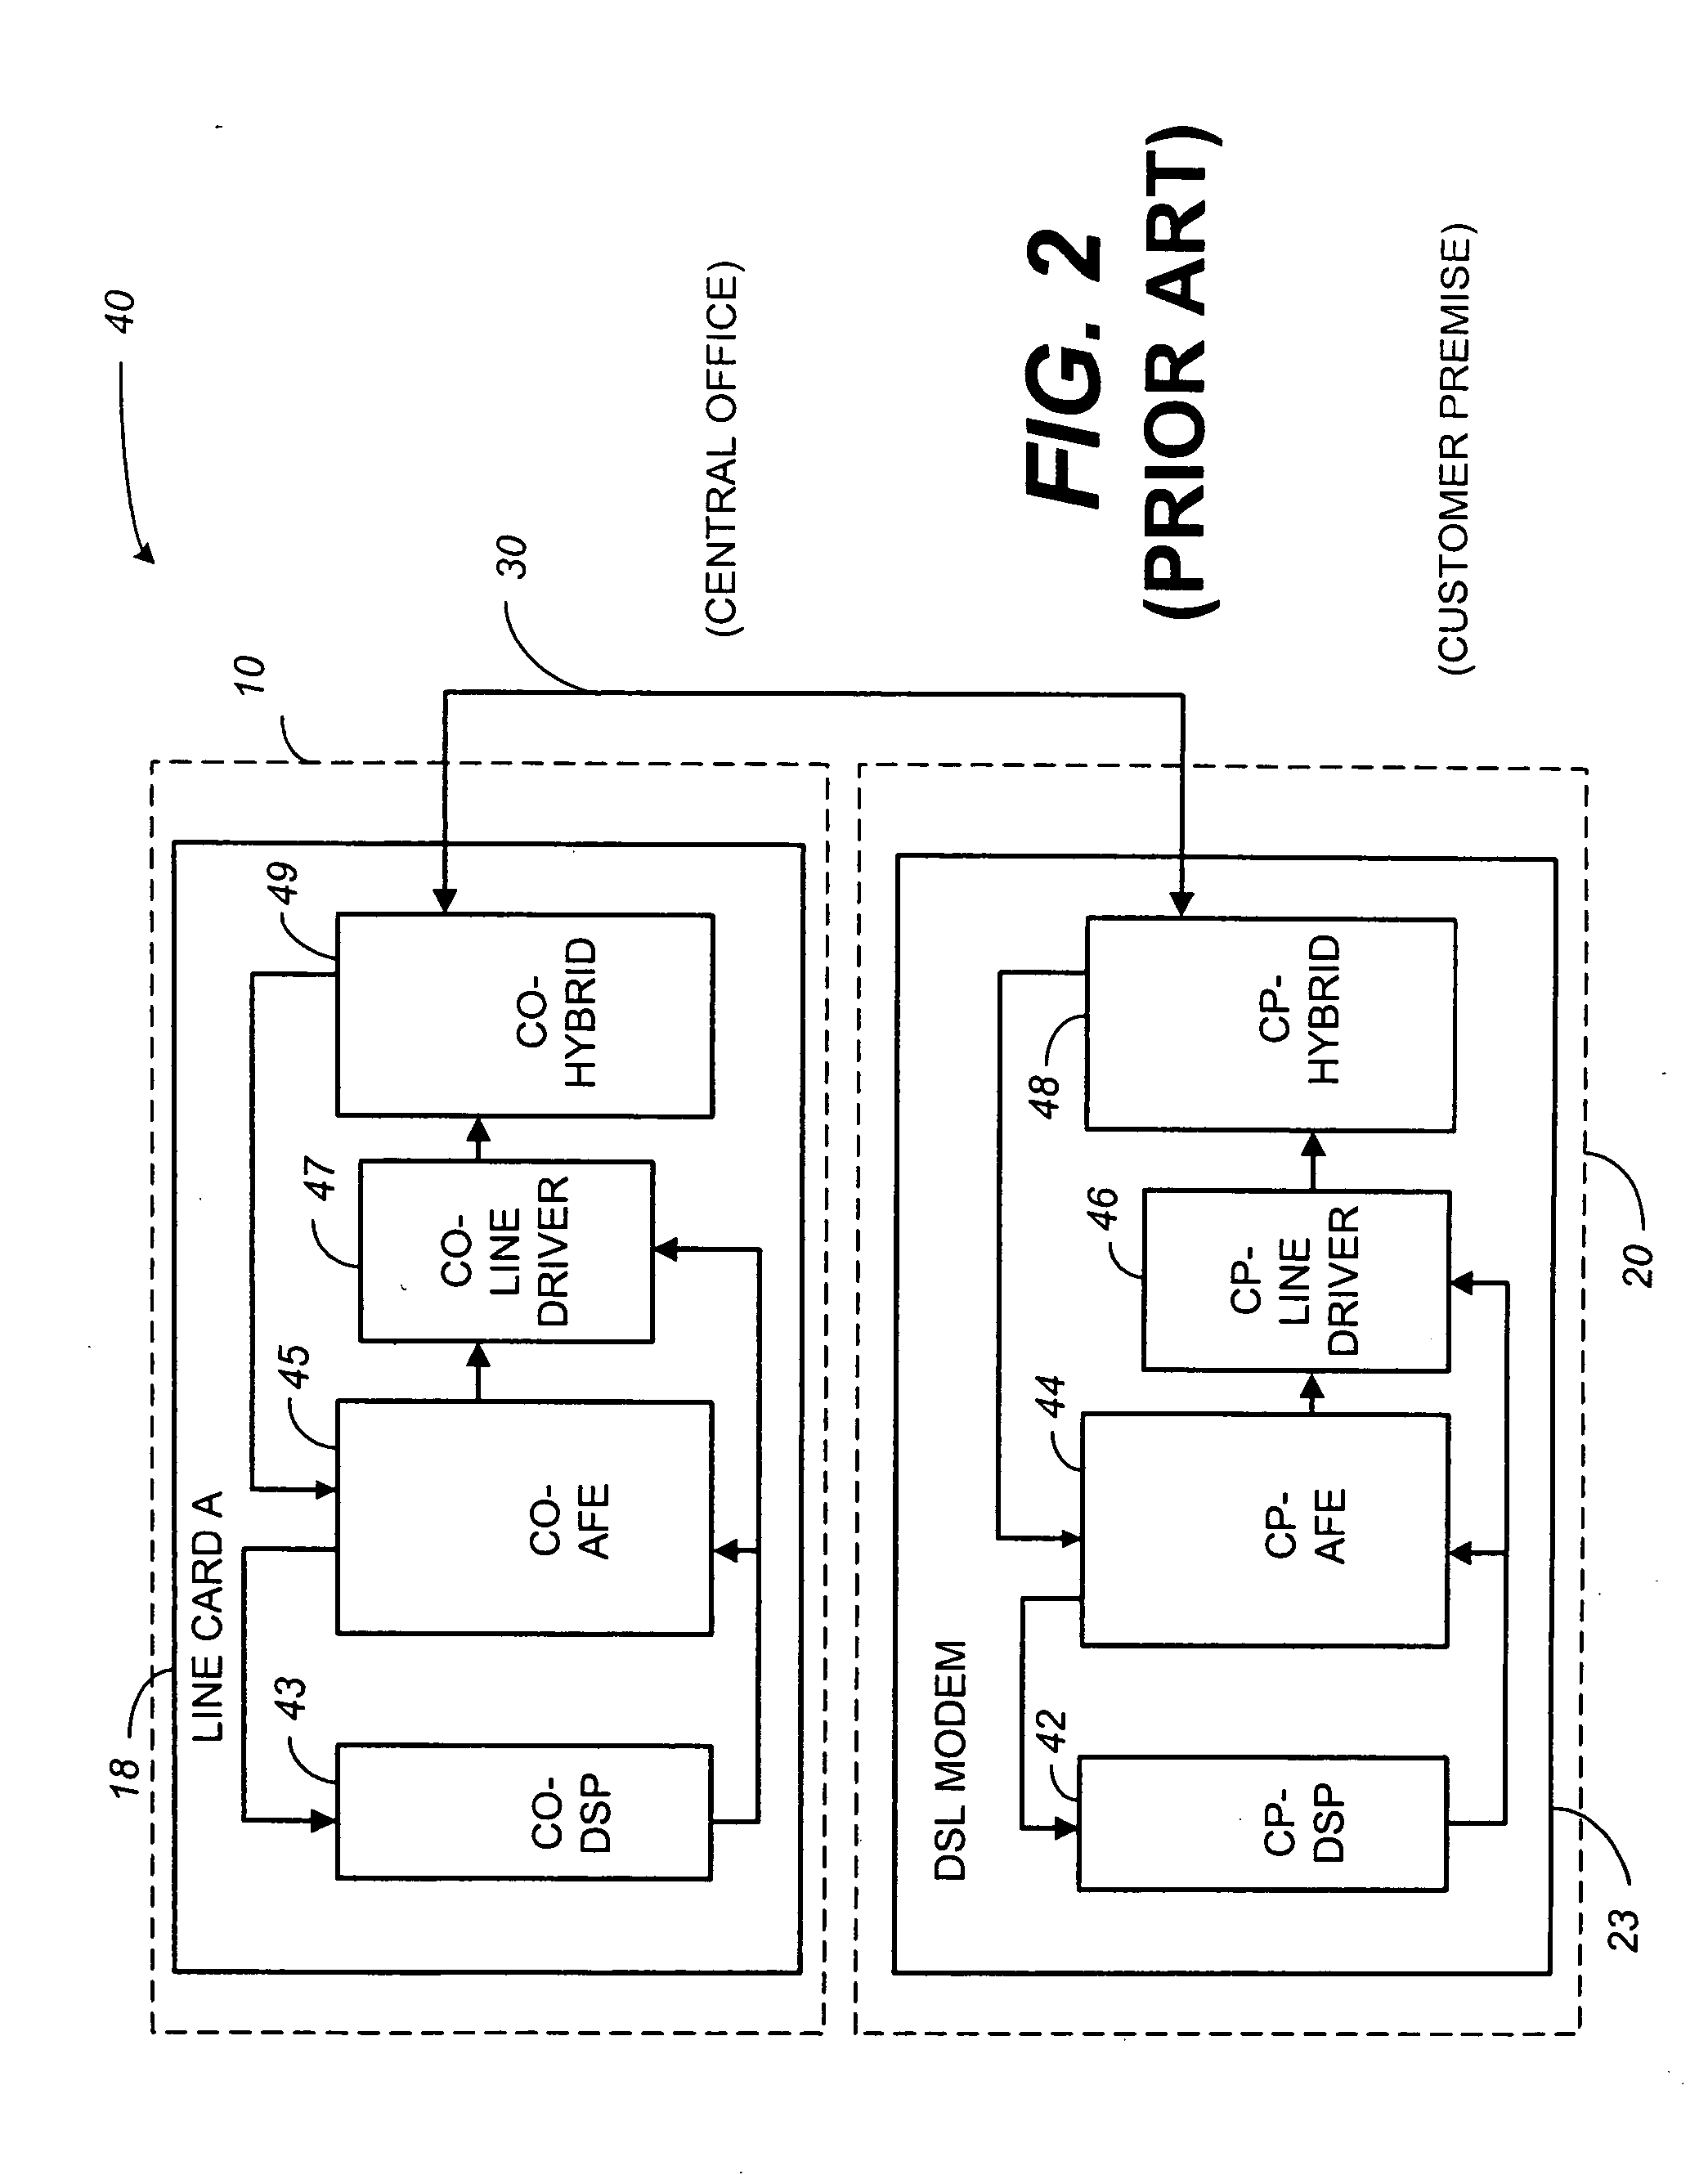 System and method for implementing a delta-sigma modulator integrity supervisor